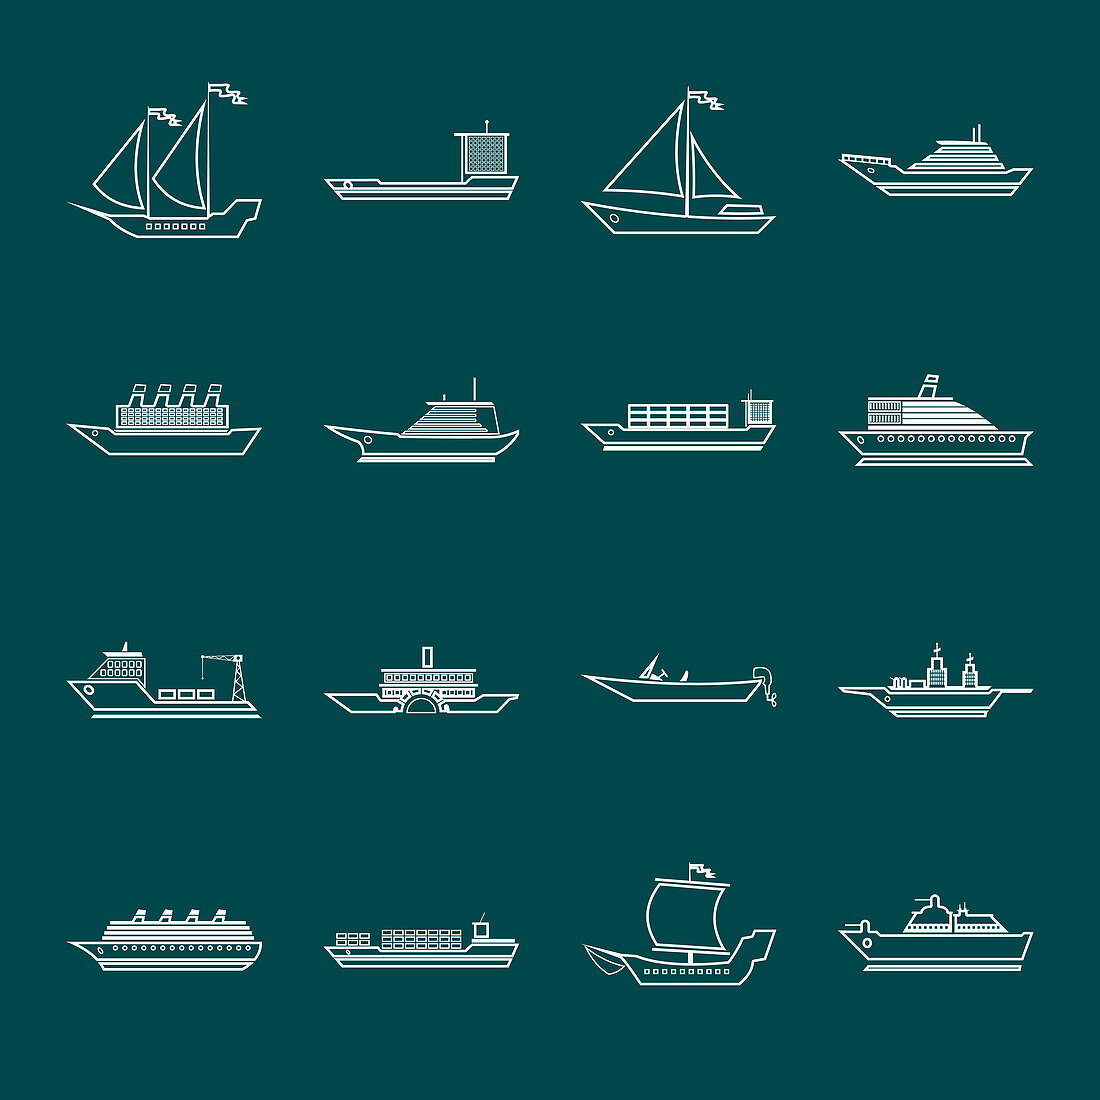 Boat and ship icons, illustration